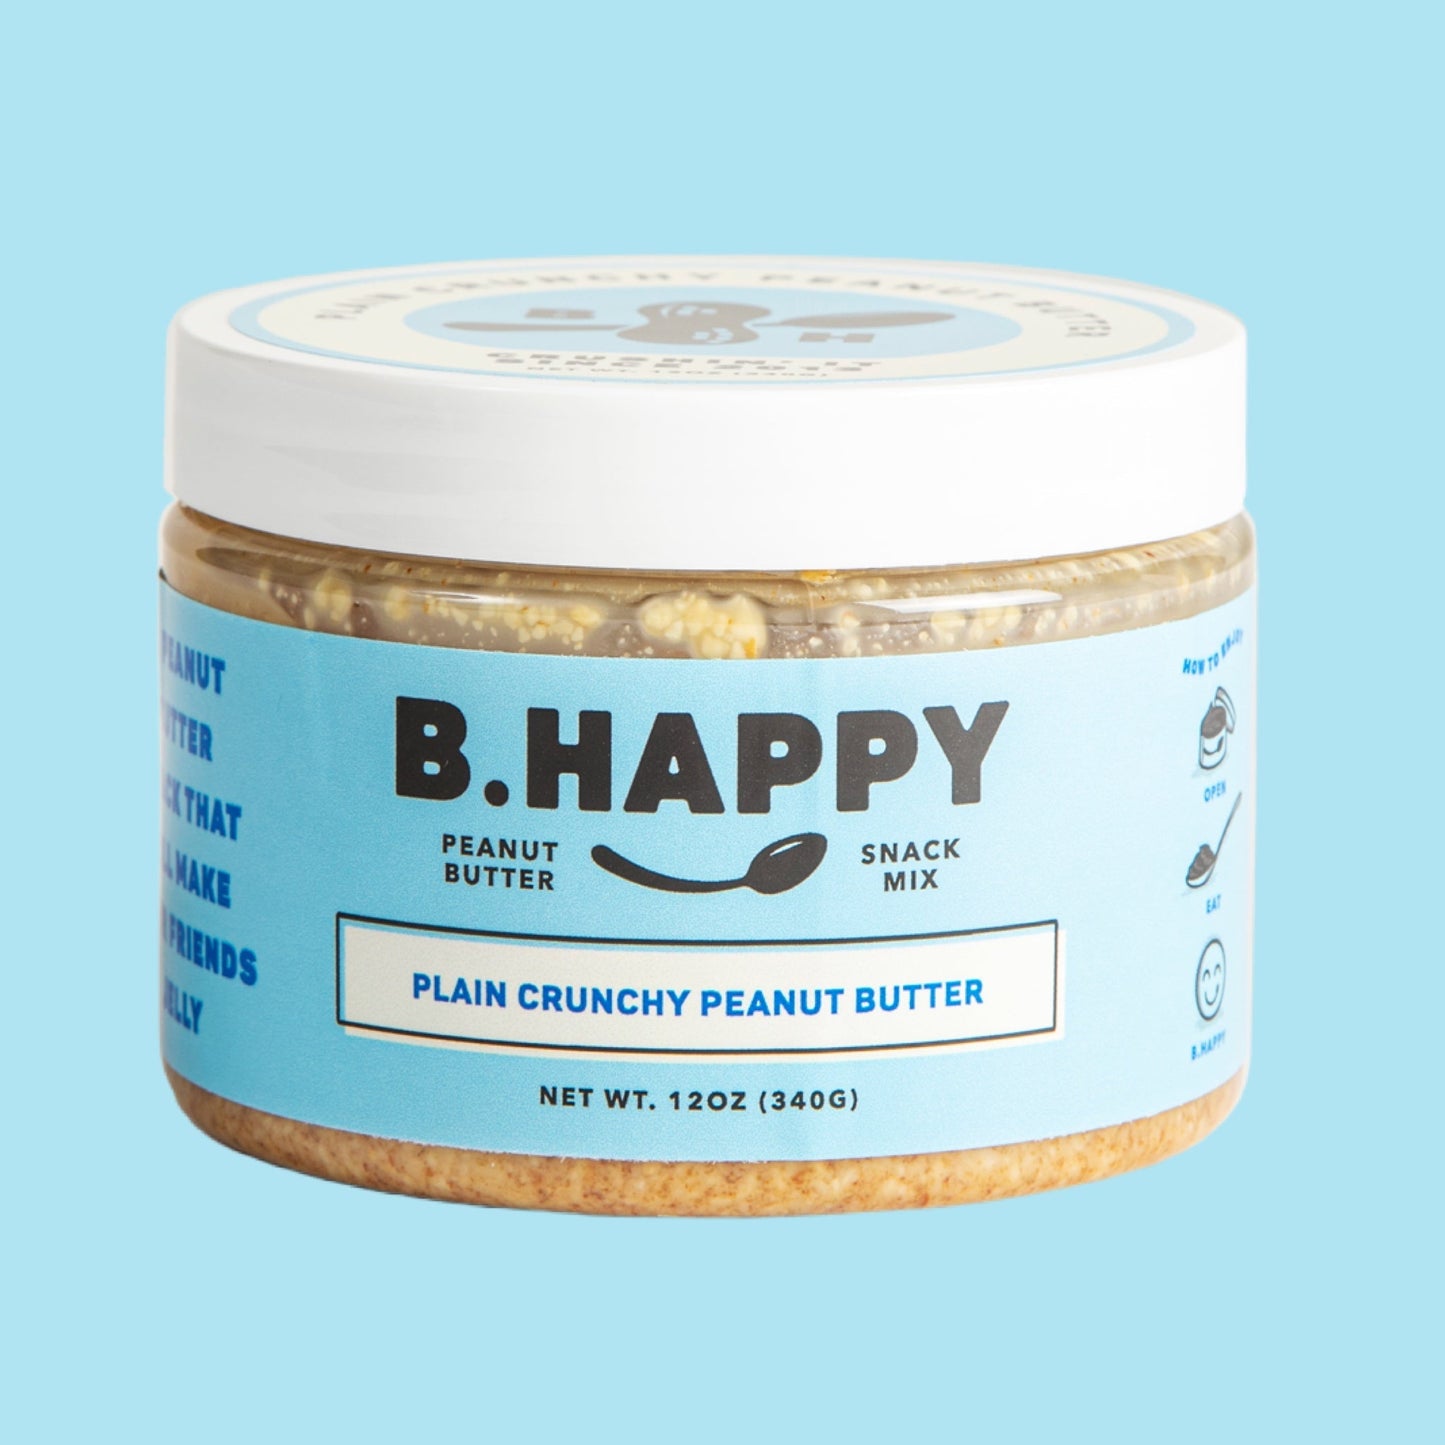 So Happy Together Peanut Butter